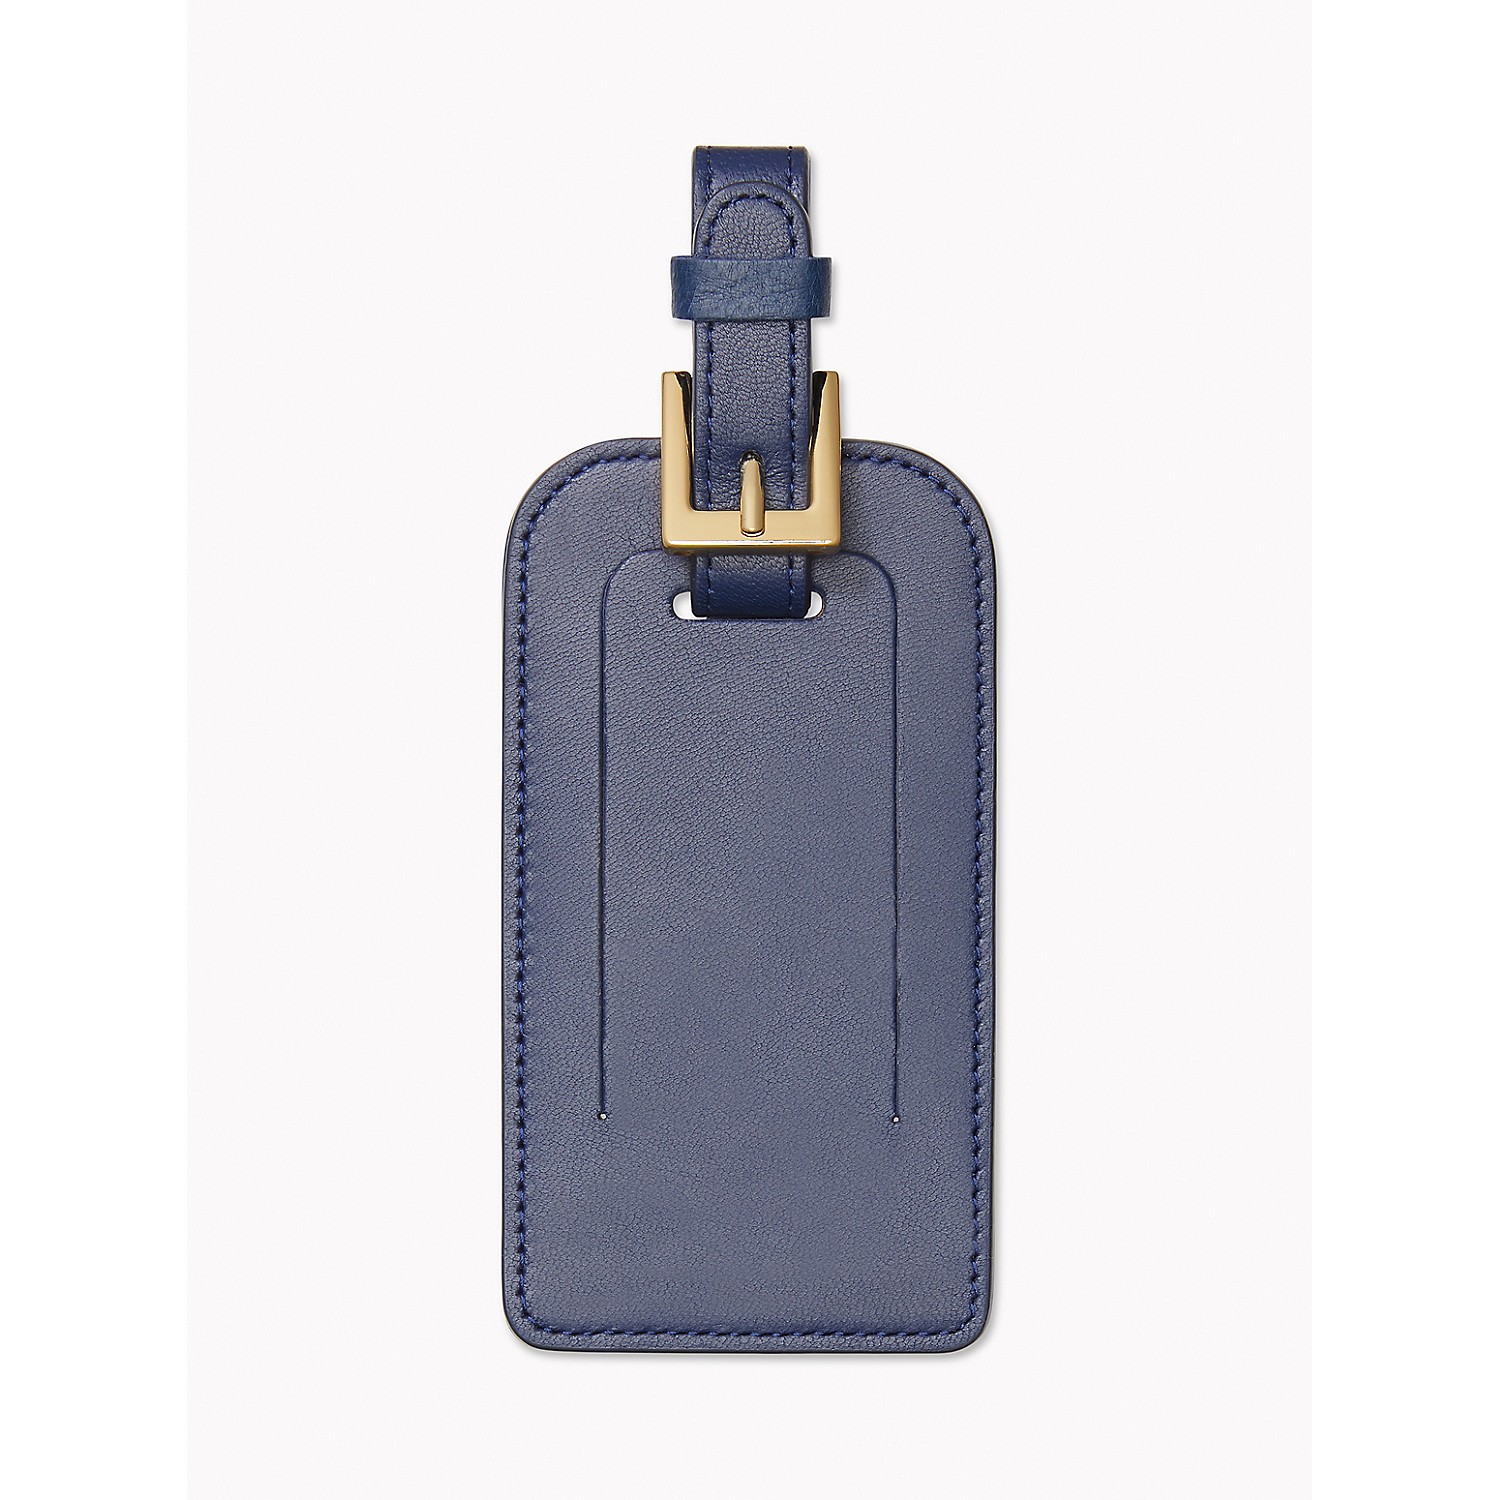 TOMMY HILFIGER Blue Luggage Tag with Buckle